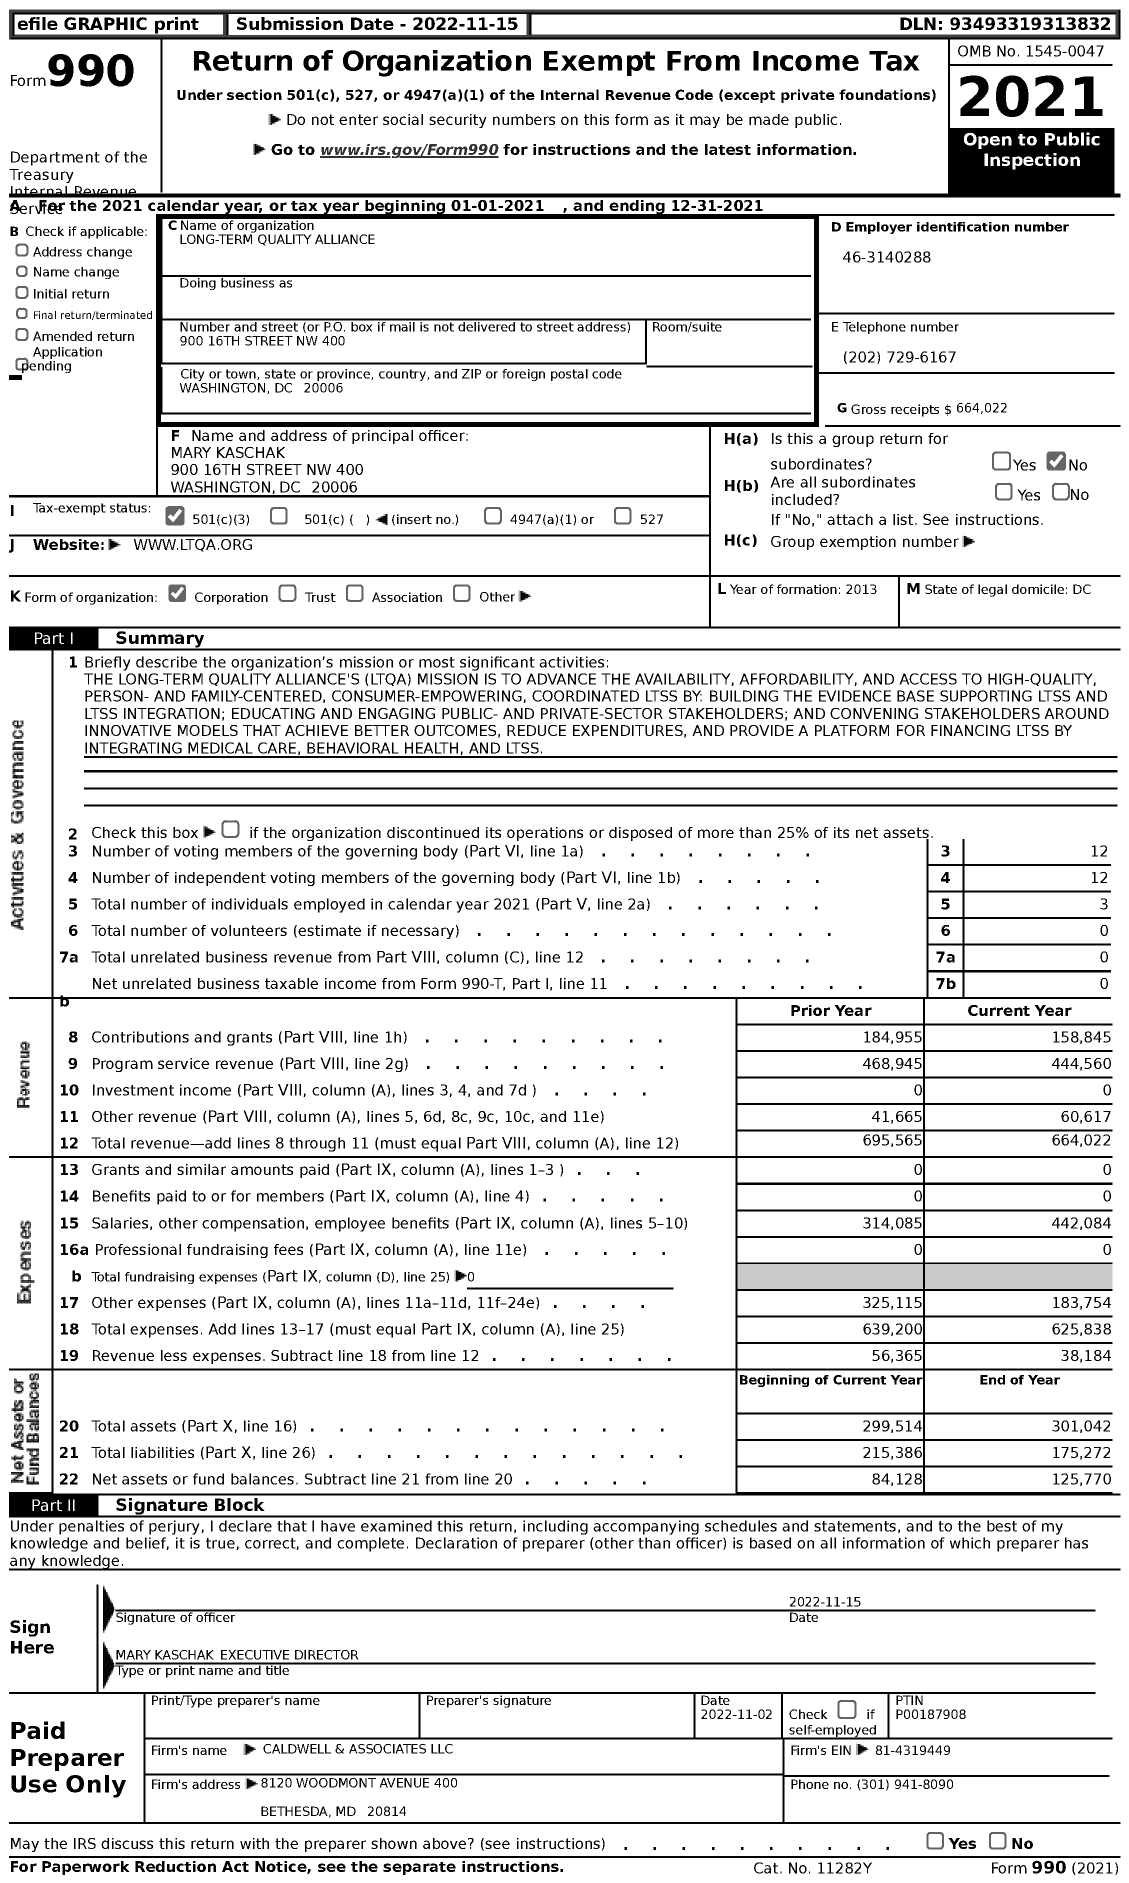 Image of first page of 2021 Form 990 for Long-Term Quality Alliance